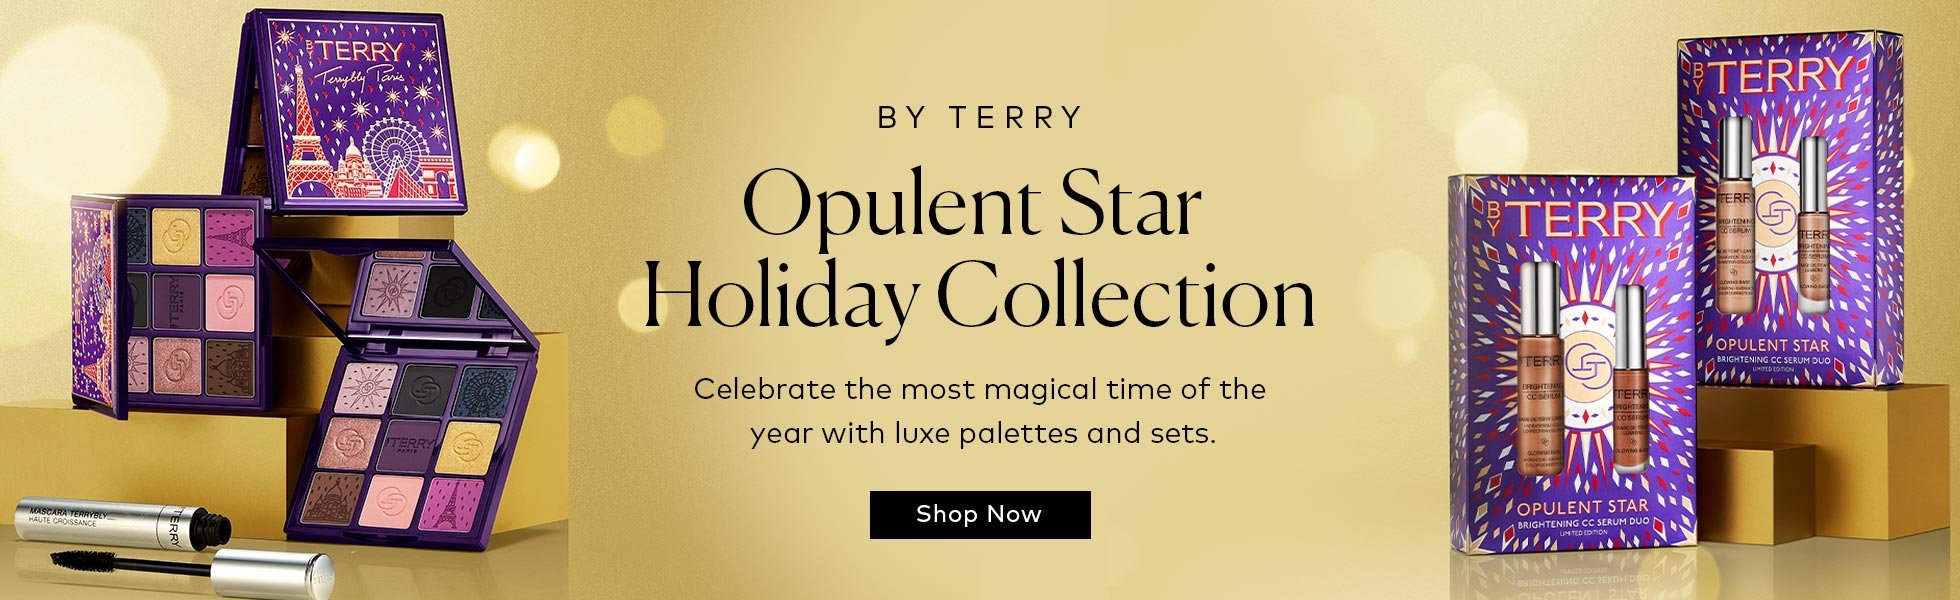 Shop the BY TERRY Opulent Star Holiday Collection at Beautylish.com